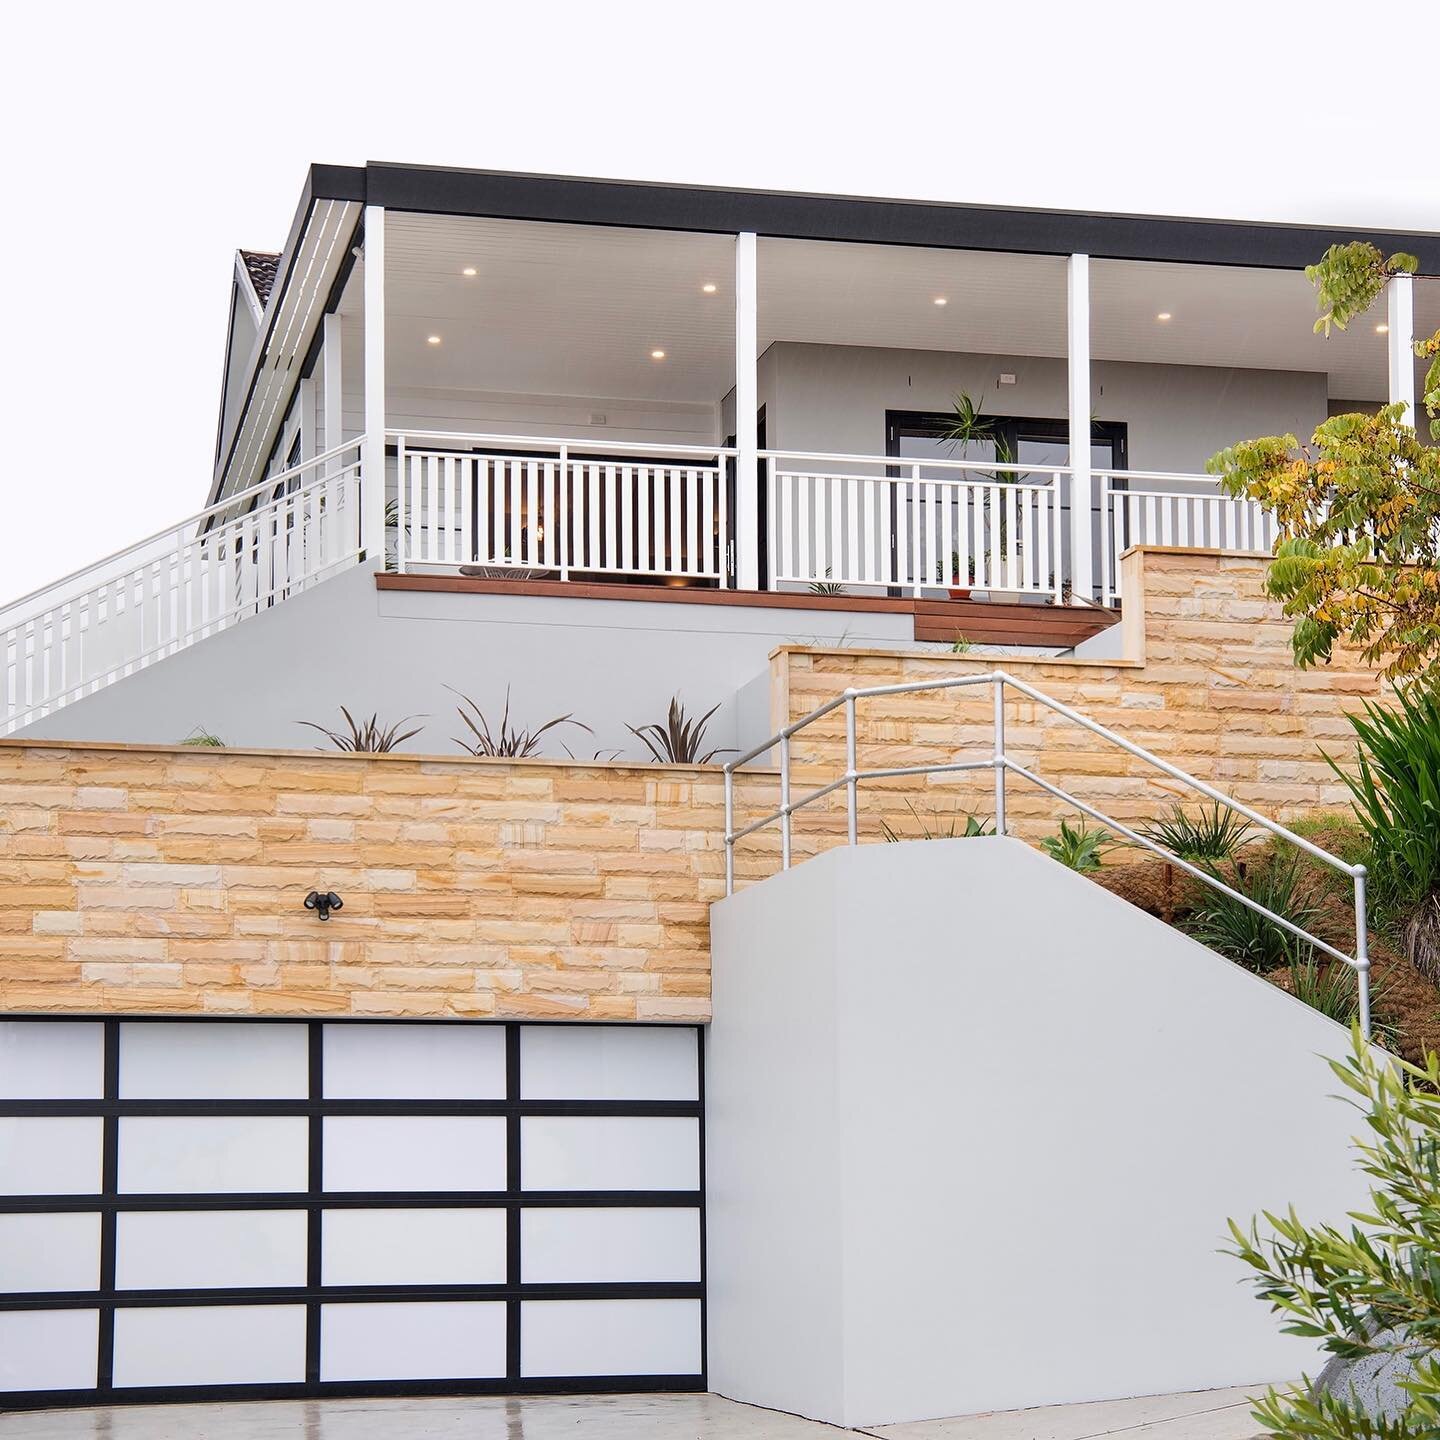 A beautiful finish on our sandstone cladded underground garage for this Hampton&rsquo;s style Maroubra Beach property. We excavated through sand to achieve this result, providing our clients with a smart solution for more living space. 

#underground